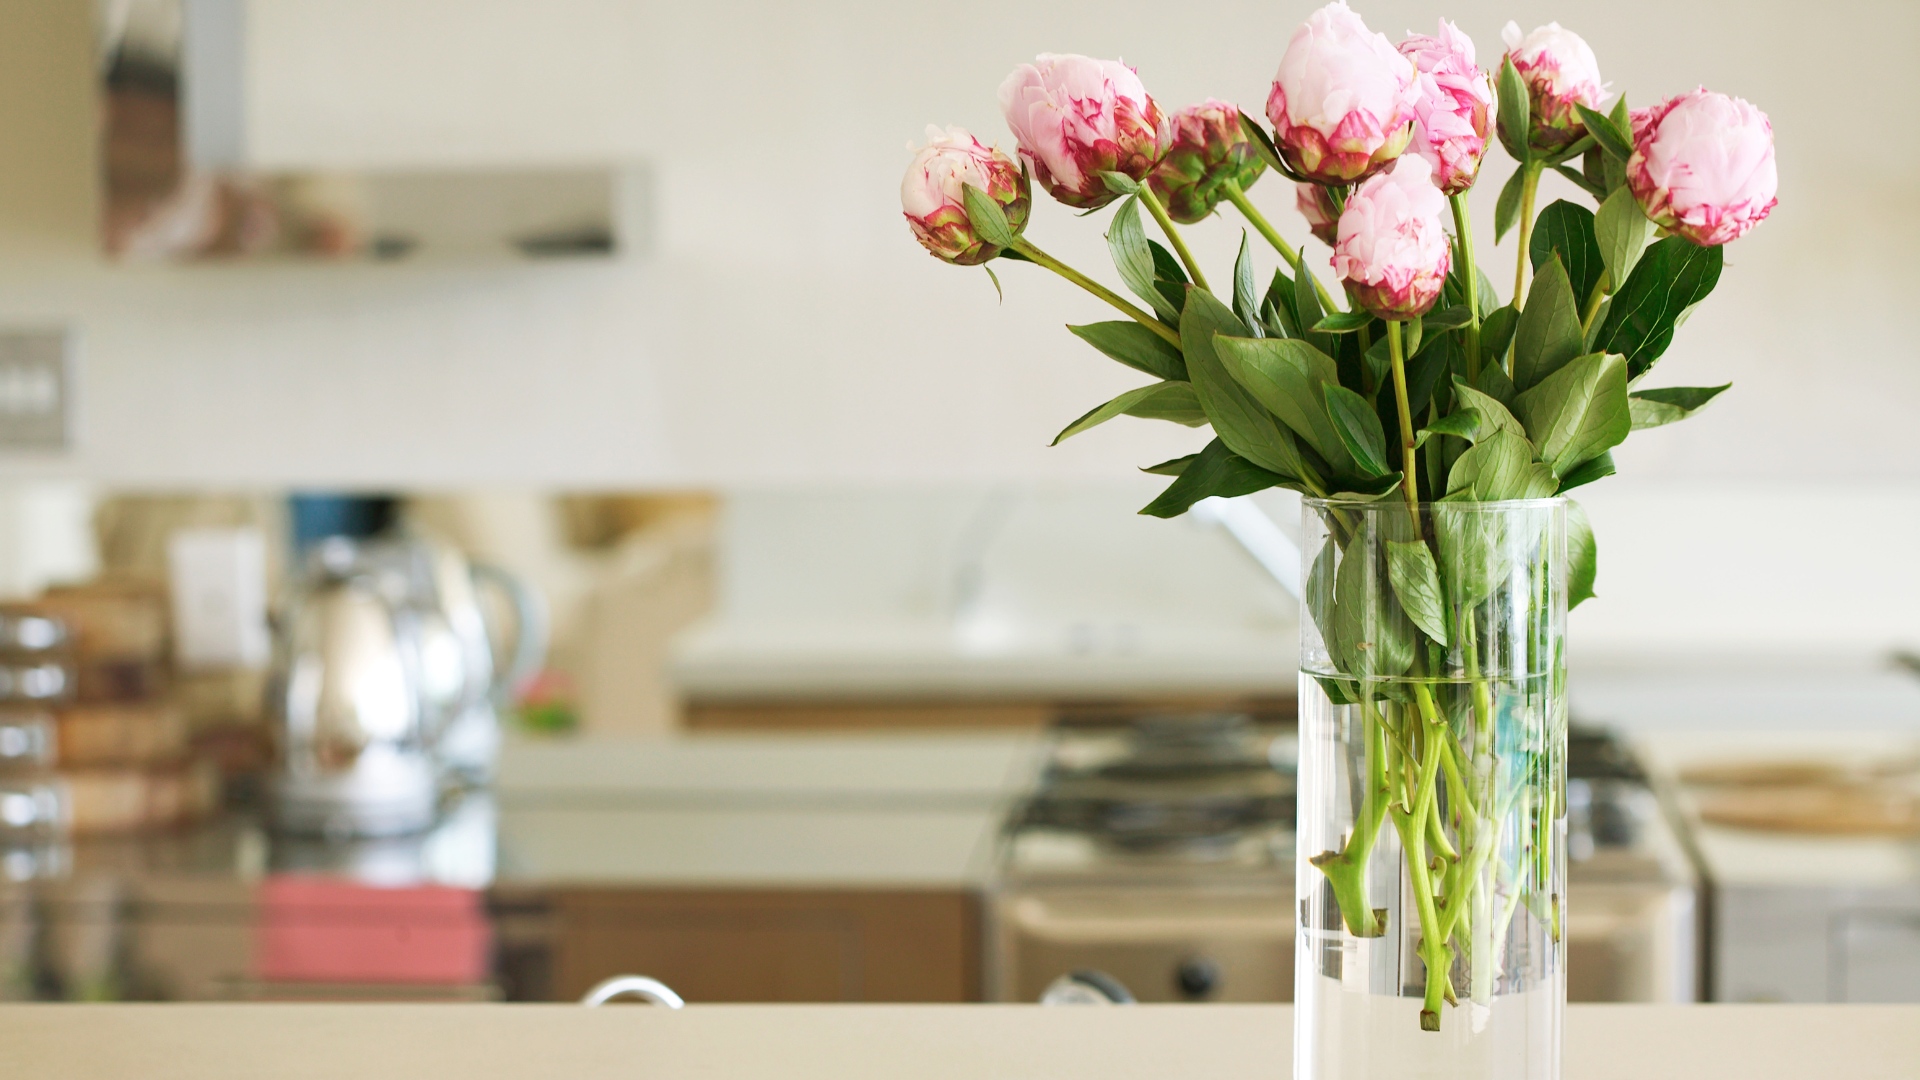 How Often To Change Water In A Vase Of Flowers To Make Them Last Longer